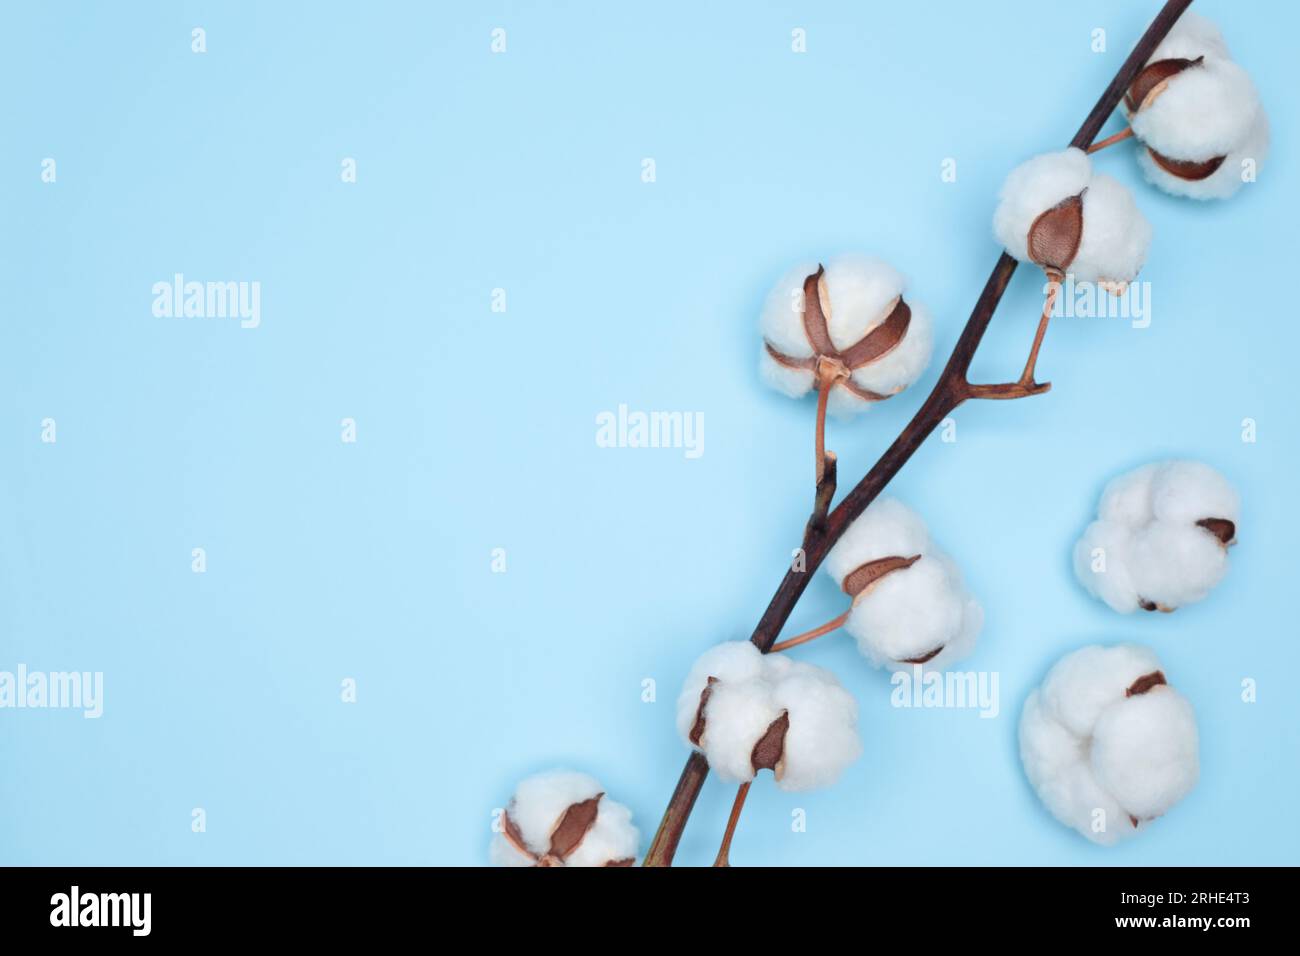 Coton Flower on delicate blue background, natural creative concept Stock Photo